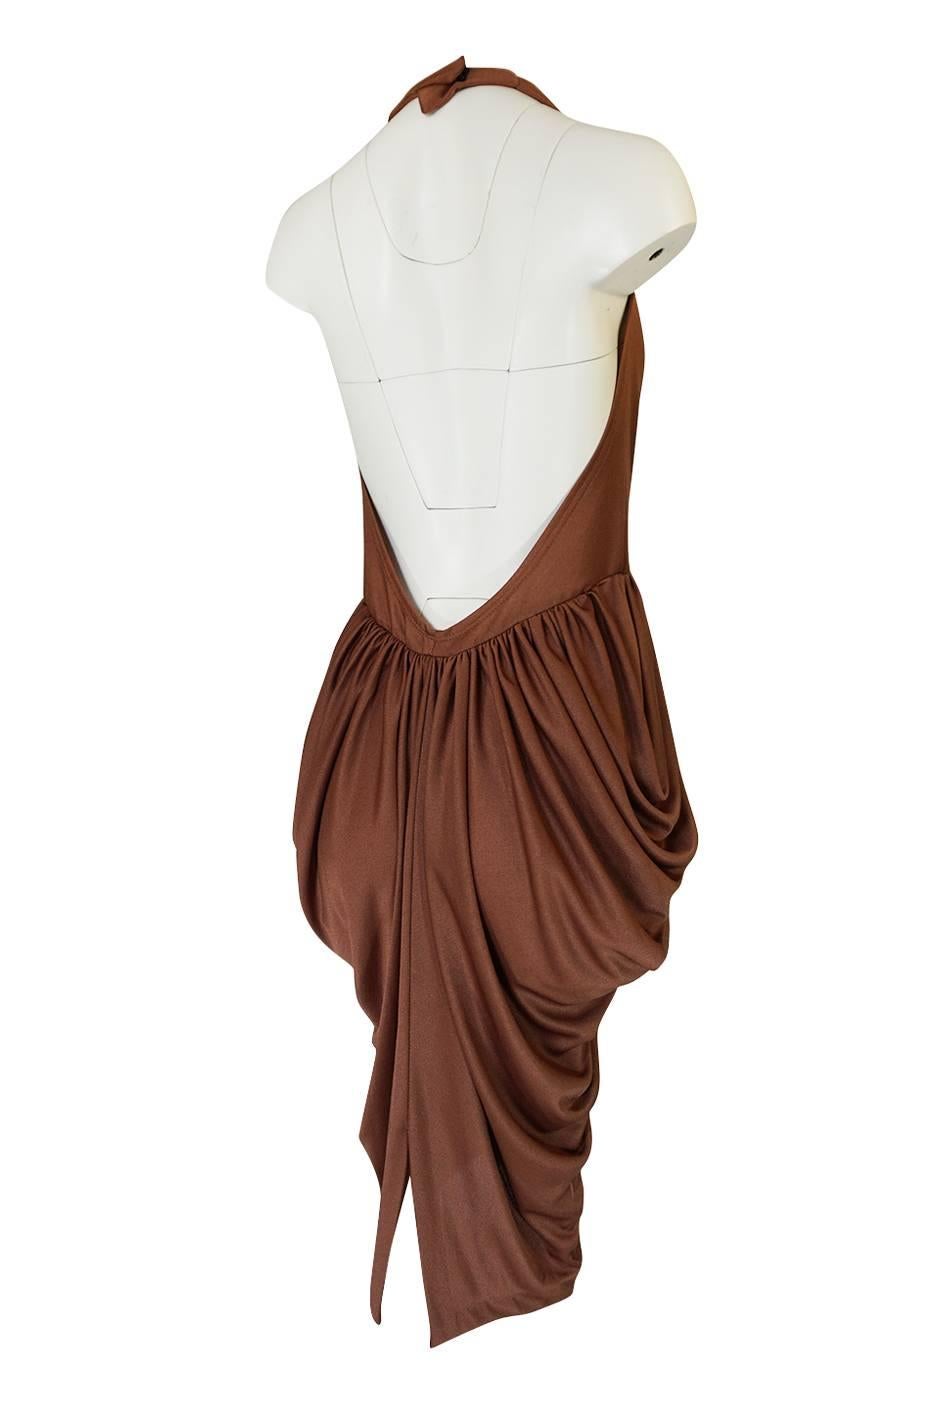 This dress is amazing. It is insanely sexy with a halter style front that plunges to just above the waist and has a back that is left completely open and bare. It is made of a liquid jersey in a deep taupe brown that feels amazing on. That fabric